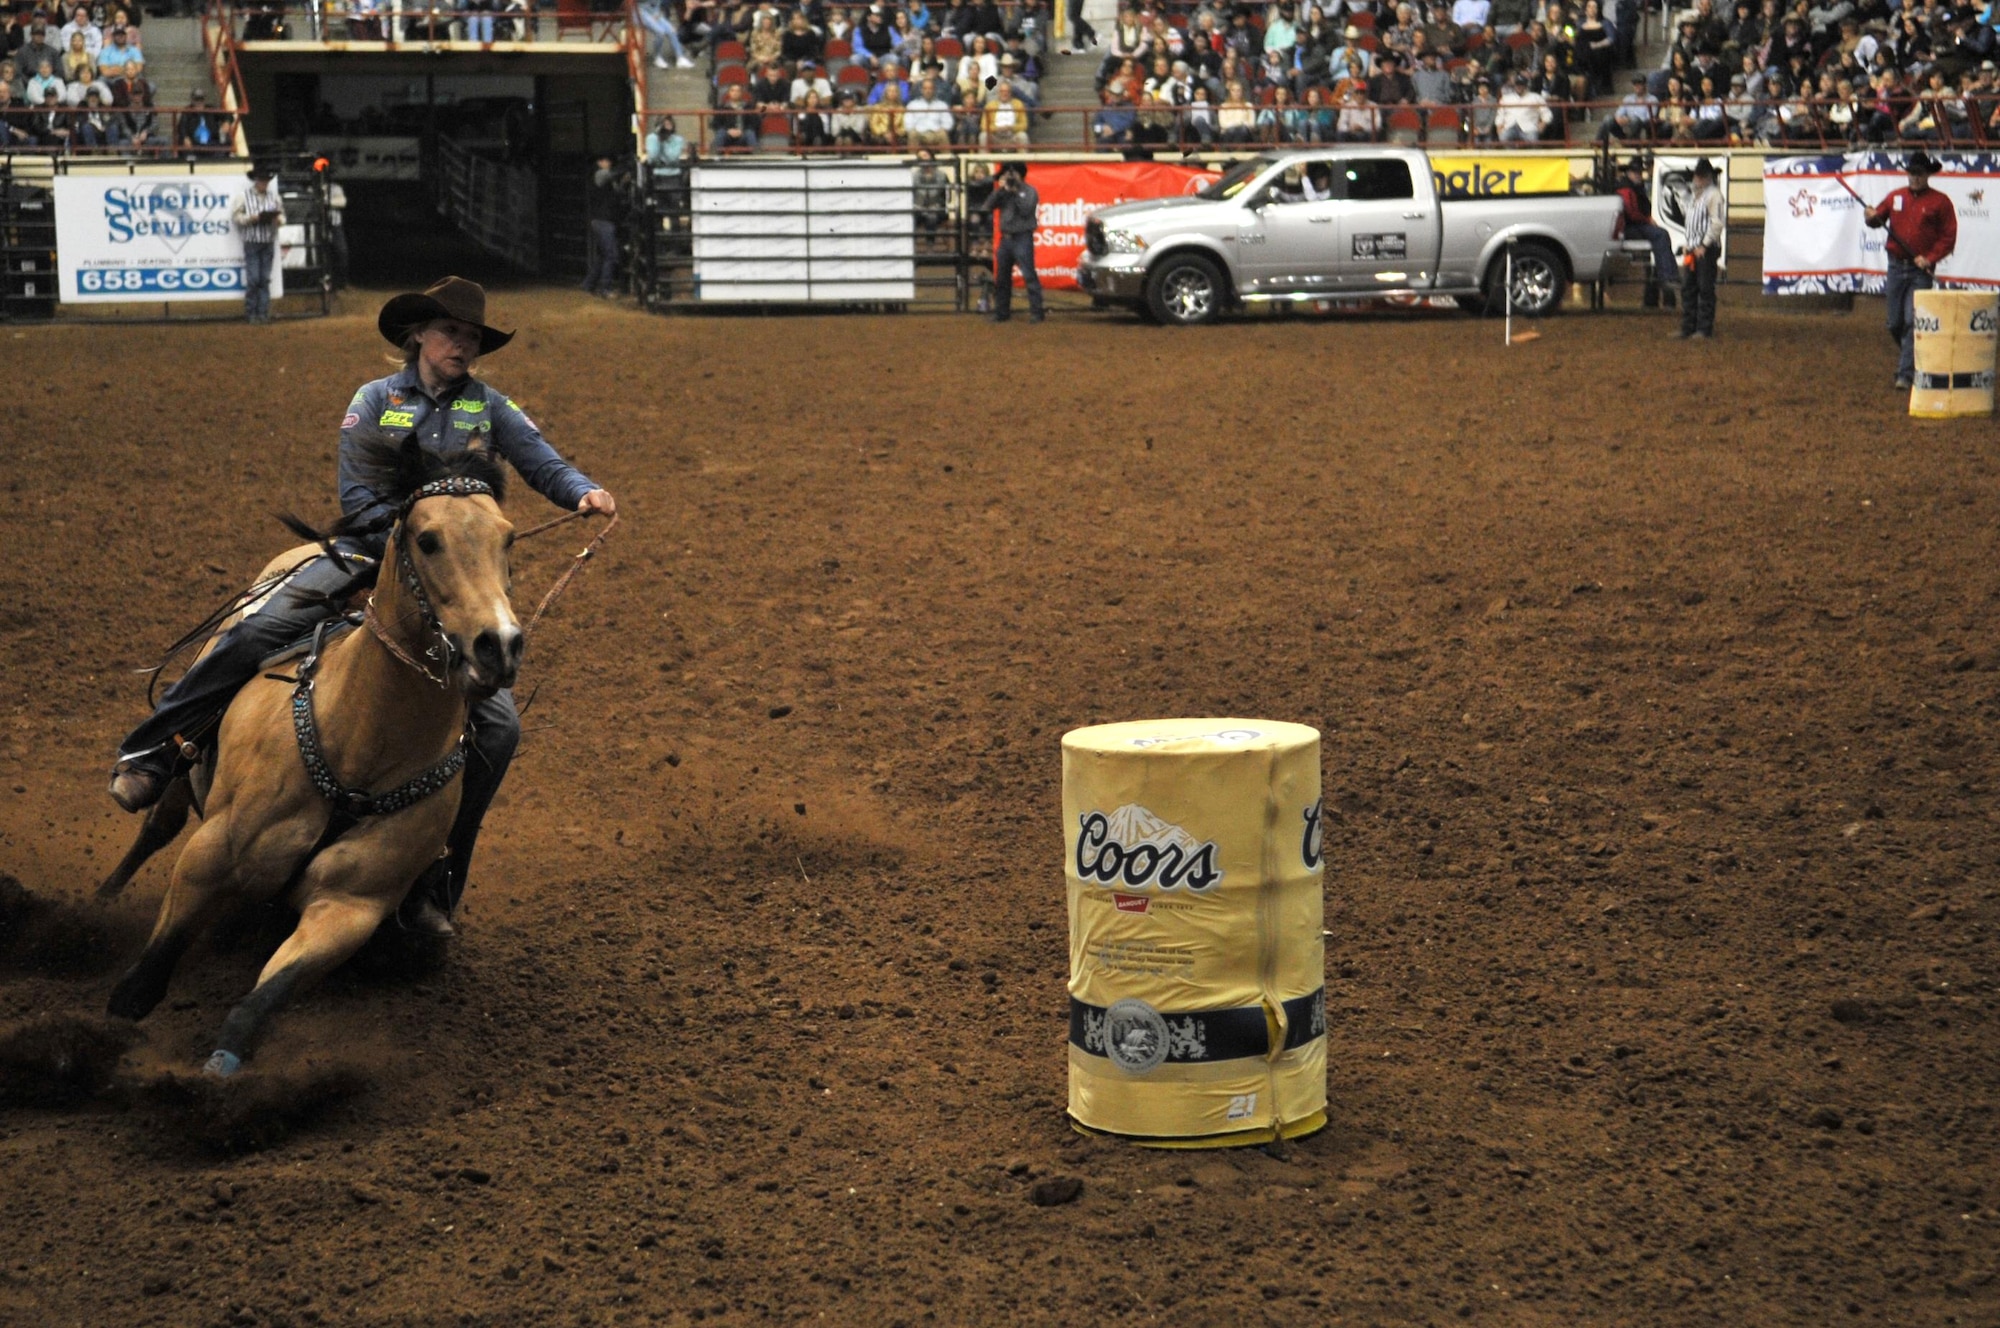 Jackie Ganter, San Angelo Stock Show and Rodeo barrel racing competitor, goes around for the last barrel during the 85th Annual San Angelo Stock Show and Rodeo Military Appreciation Night at the Foster Communications Coliseum in San Angelo, Texas, Feb. 15, 2017. Besides barrel racing, the rodeo featured calf roping and bareback horse riding. (U.S. Air Force photo by Staff Sgt. Laura R. McFarlane/Released)